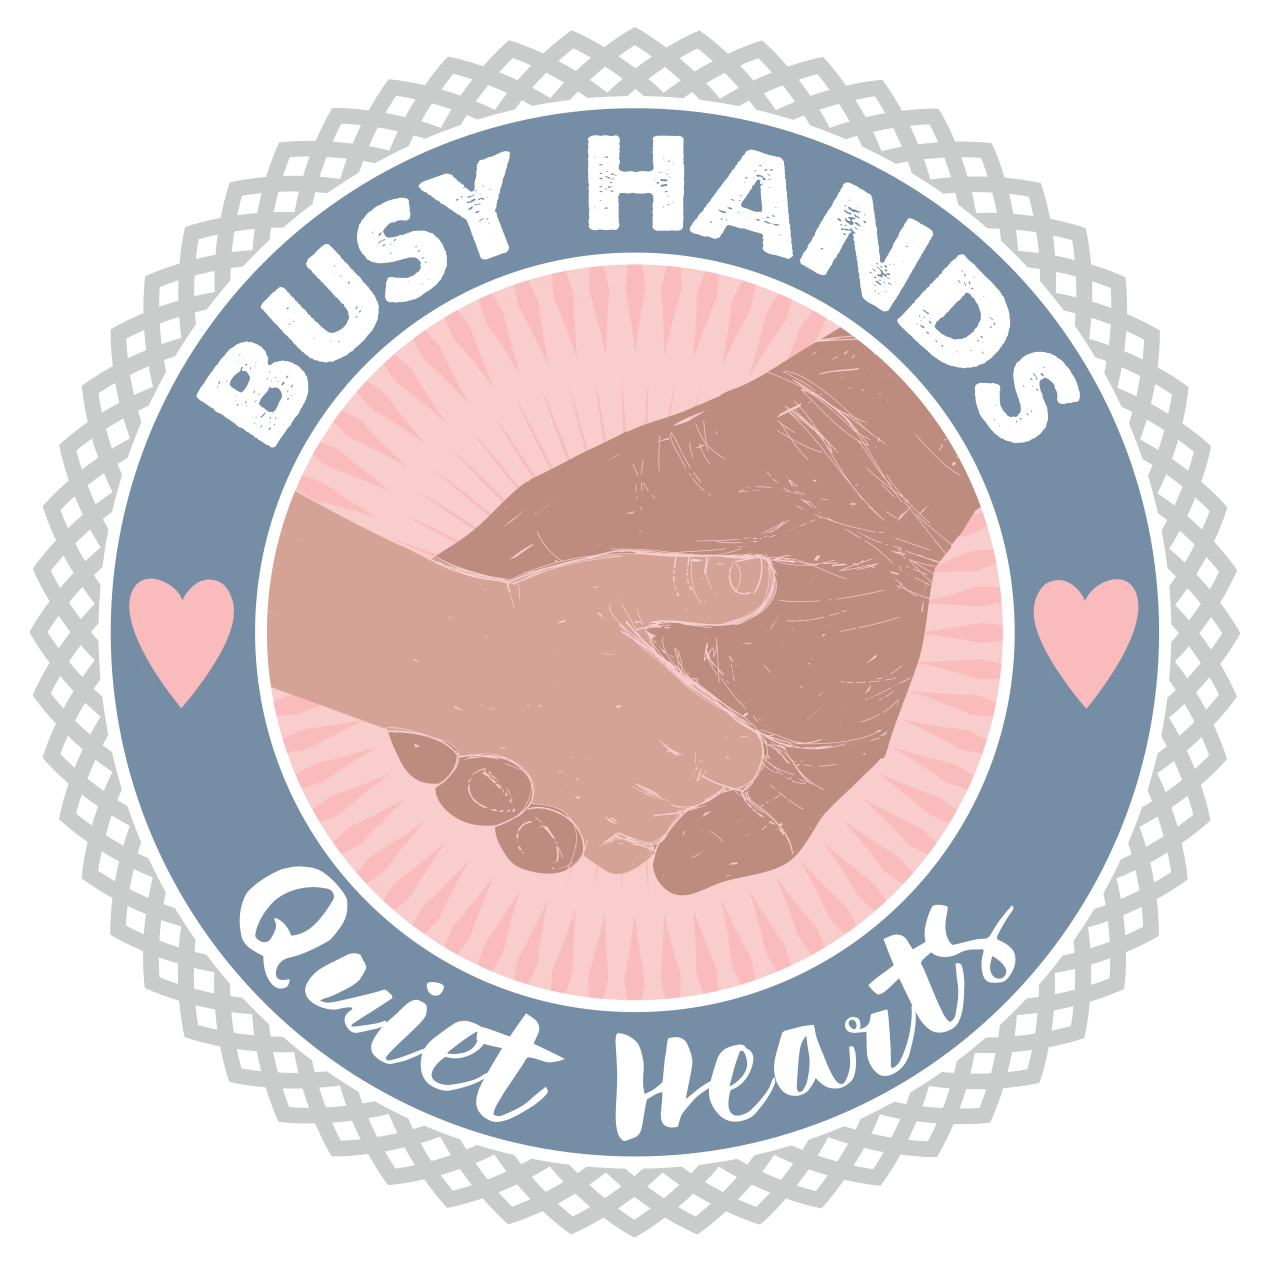 Busy-Hands-Quiet-Hearts_logo-final_round.gif